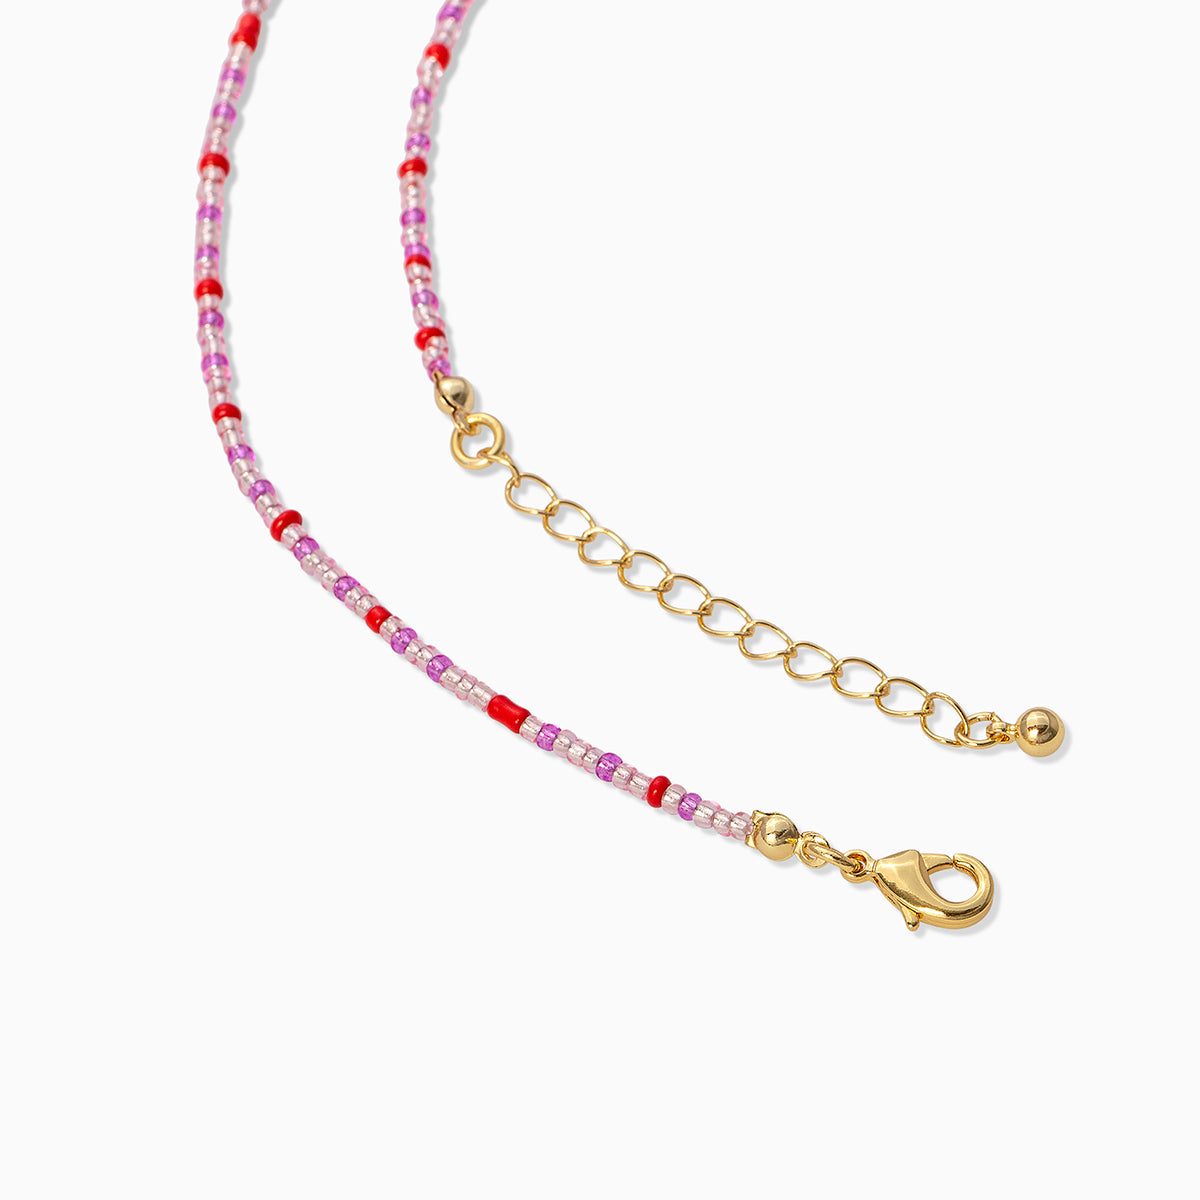 Hot Pink Torsade Necklace Wood Beaded Jewelry - Ping Belle | NOVICA